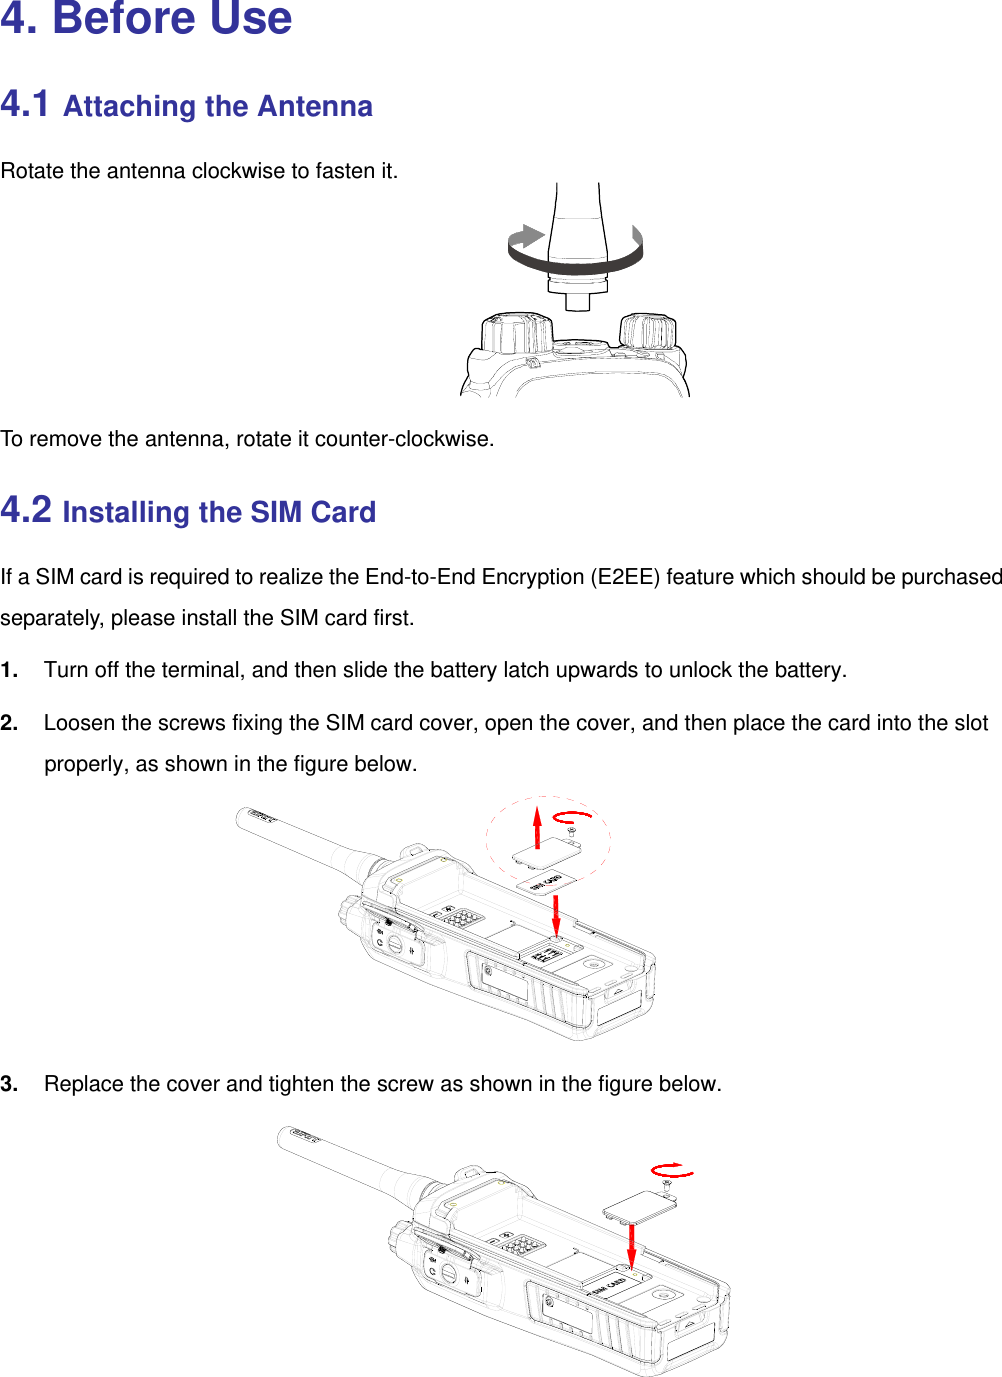  4. Before Use 4.1 Attaching the Antenna Rotate the antenna clockwise to fasten it.     To remove the antenna, rotate it counter-clockwise. 4.2 Installing the SIM Card If a SIM card is required to realize the End-to-End Encryption (E2EE) feature which should be purchased separately, please install the SIM card first. 1.  Turn off the terminal, and then slide the battery latch upwards to unlock the battery.   2.  Loosen the screws fixing the SIM card cover, open the cover, and then place the card into the slot properly, as shown in the figure below.      3.  Replace the cover and tighten the screw as shown in the figure below.     